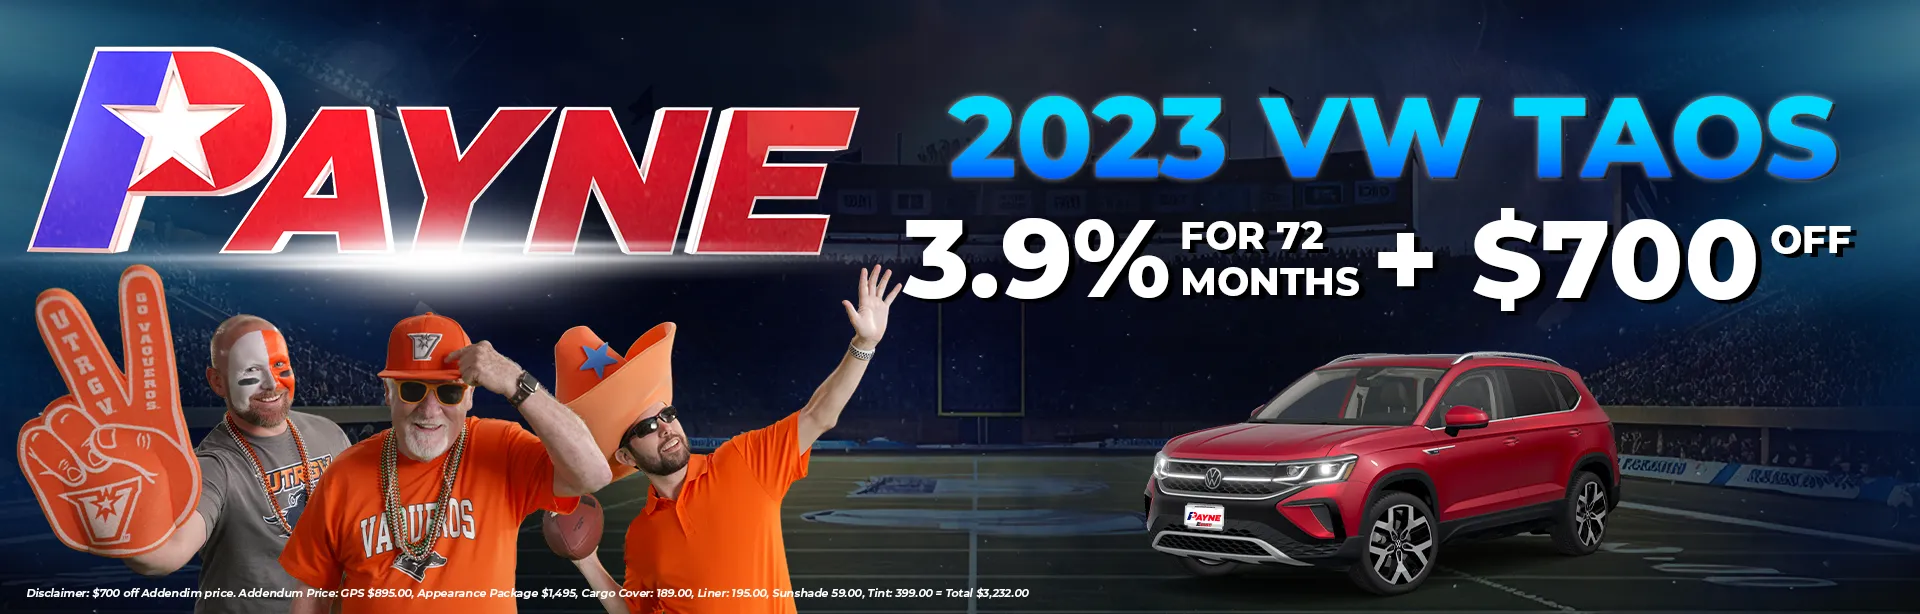 Get 3.9% off for 72 Months on a 2023 VW Taos